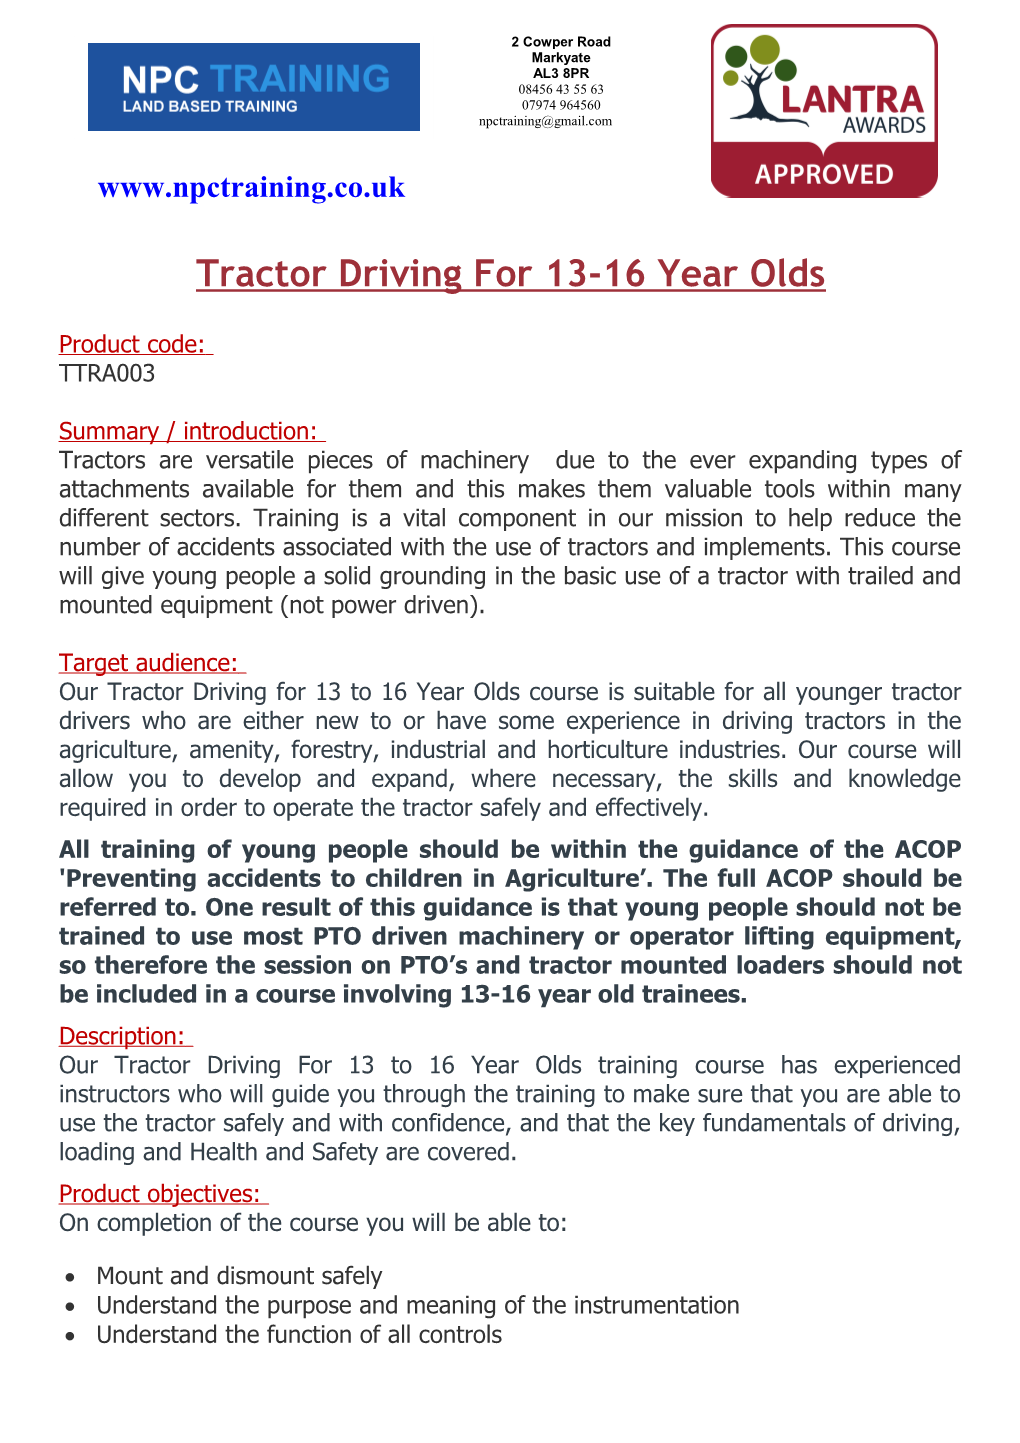 Tractor Driving for 13-16 Year Olds